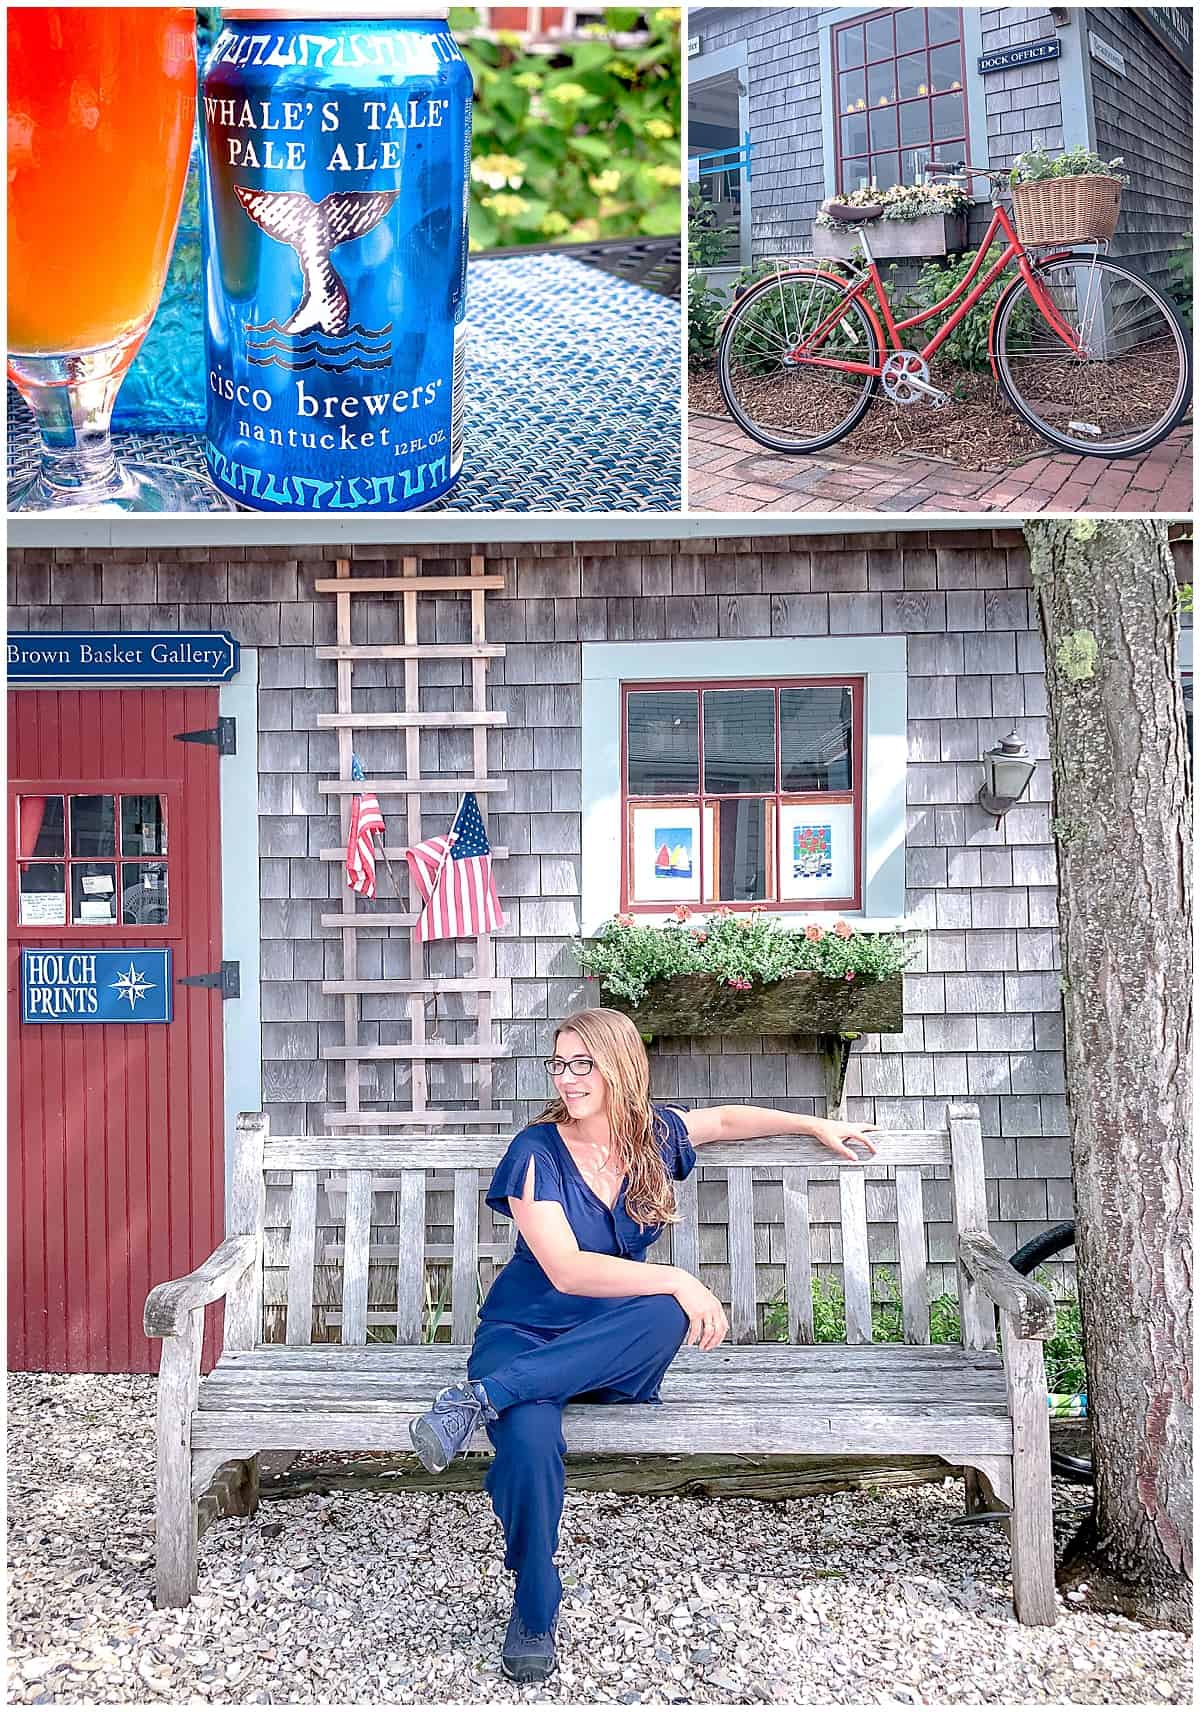 Things to do in Nantucket Island